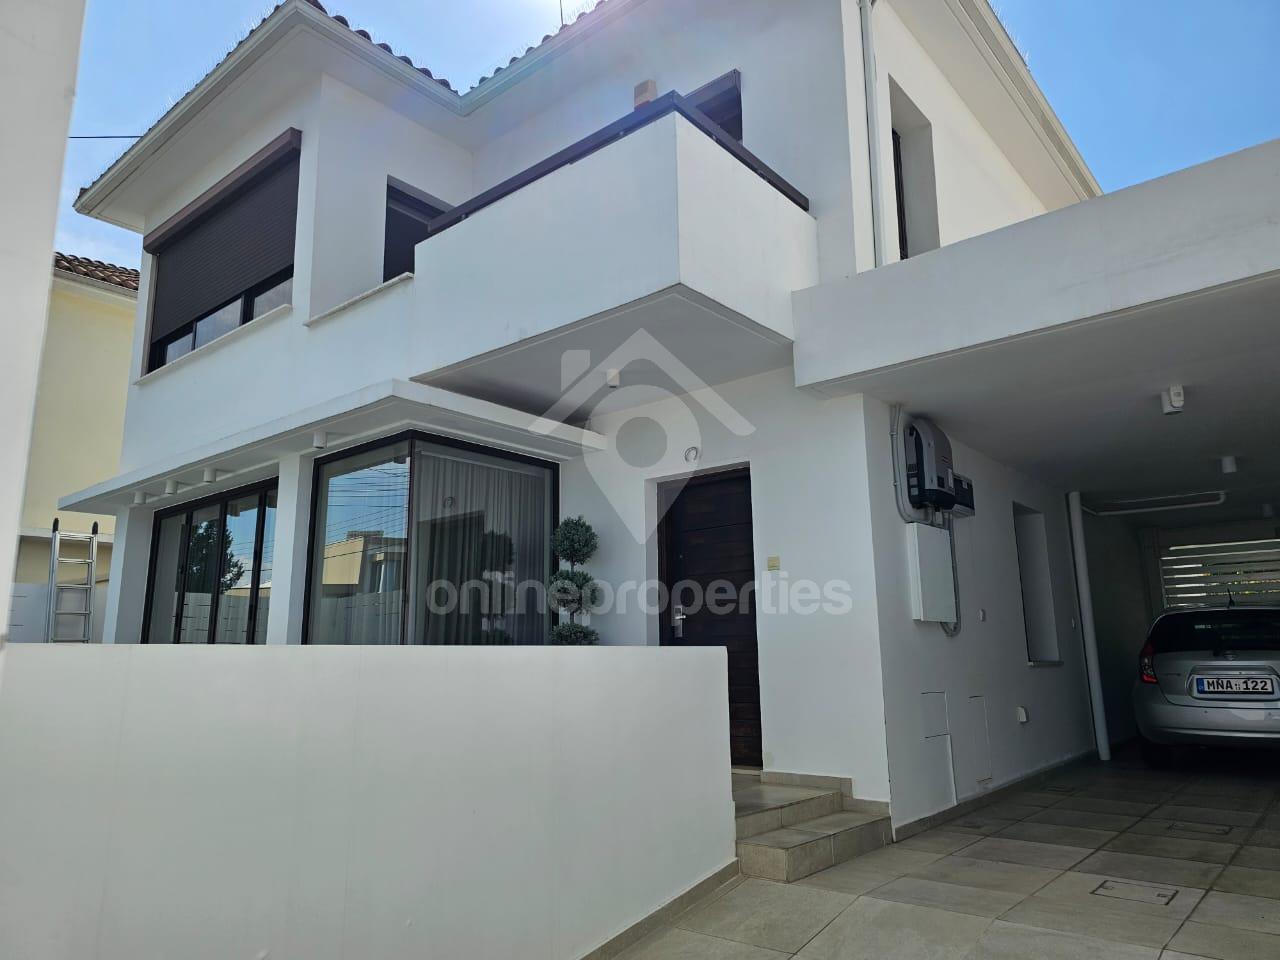 4-bedroom house with a swimming pool near APOEL training center 